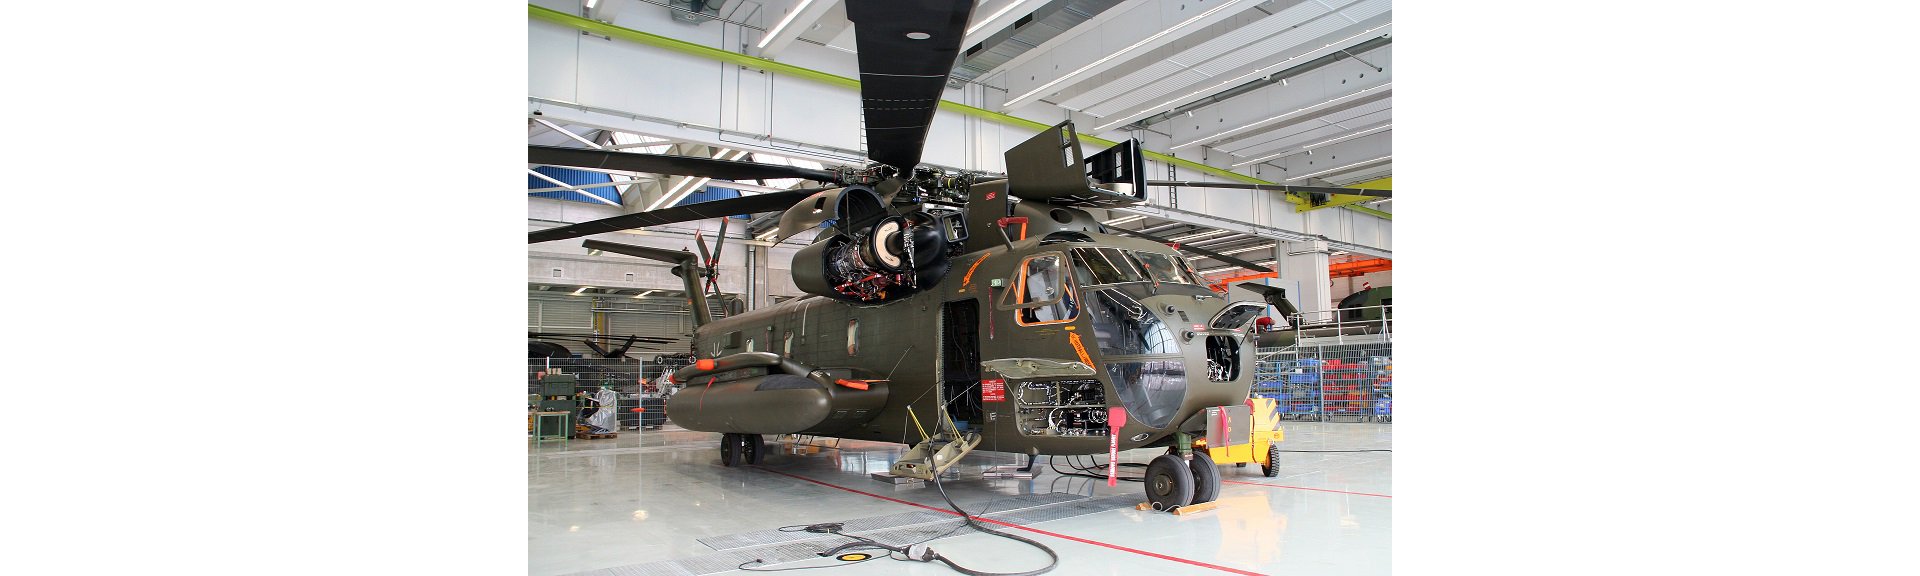 Airbus Awarded Contract To Retrofit 26 Bundeswehr Ch 53 Helicopters Helicopters Airbus